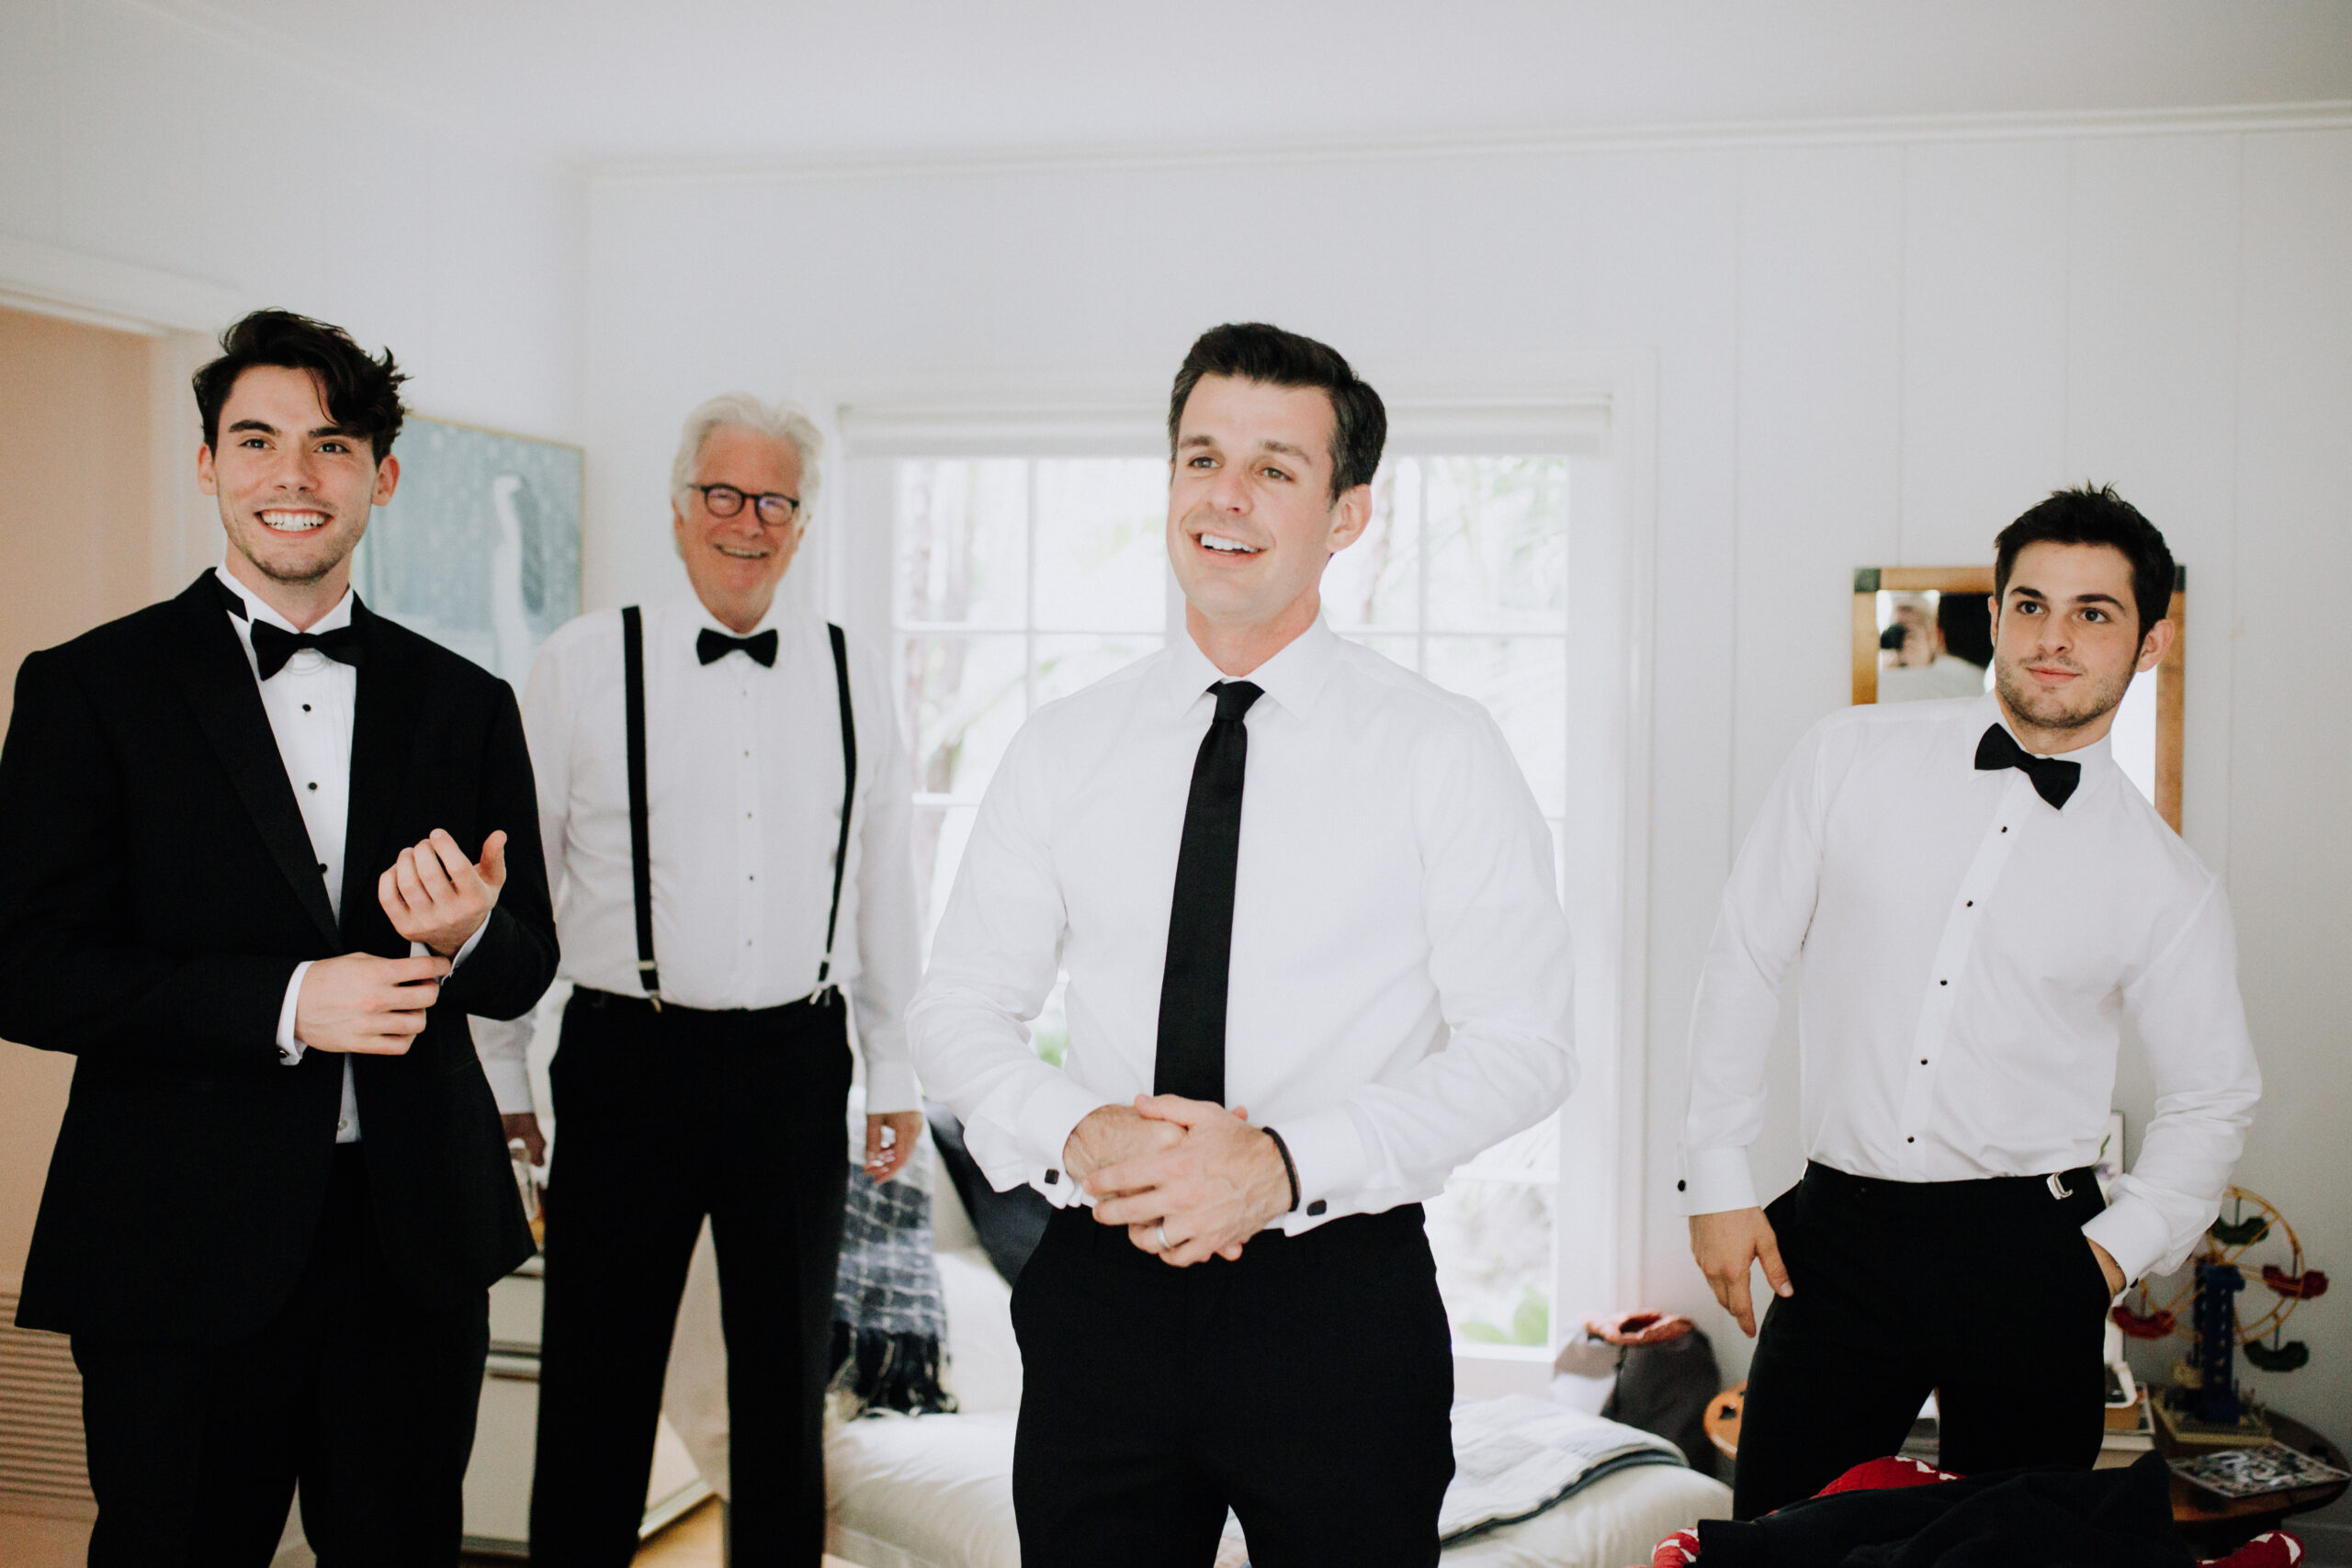 groom poses with his groomsmen